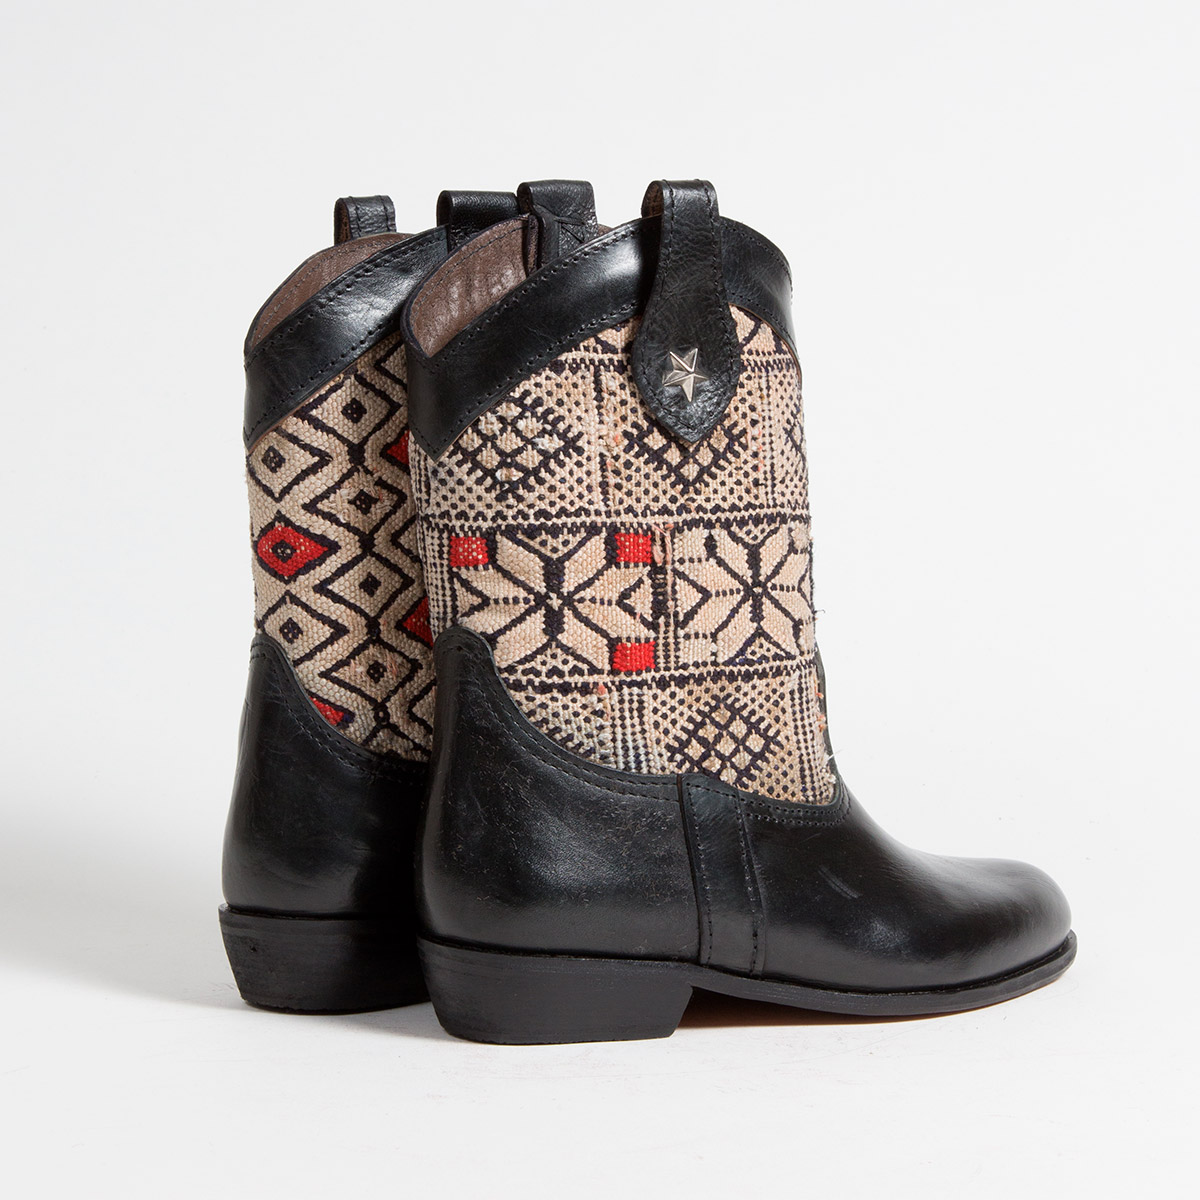 Bottines Kilim cuir mababouche artisanales (Réf. MN2-37)